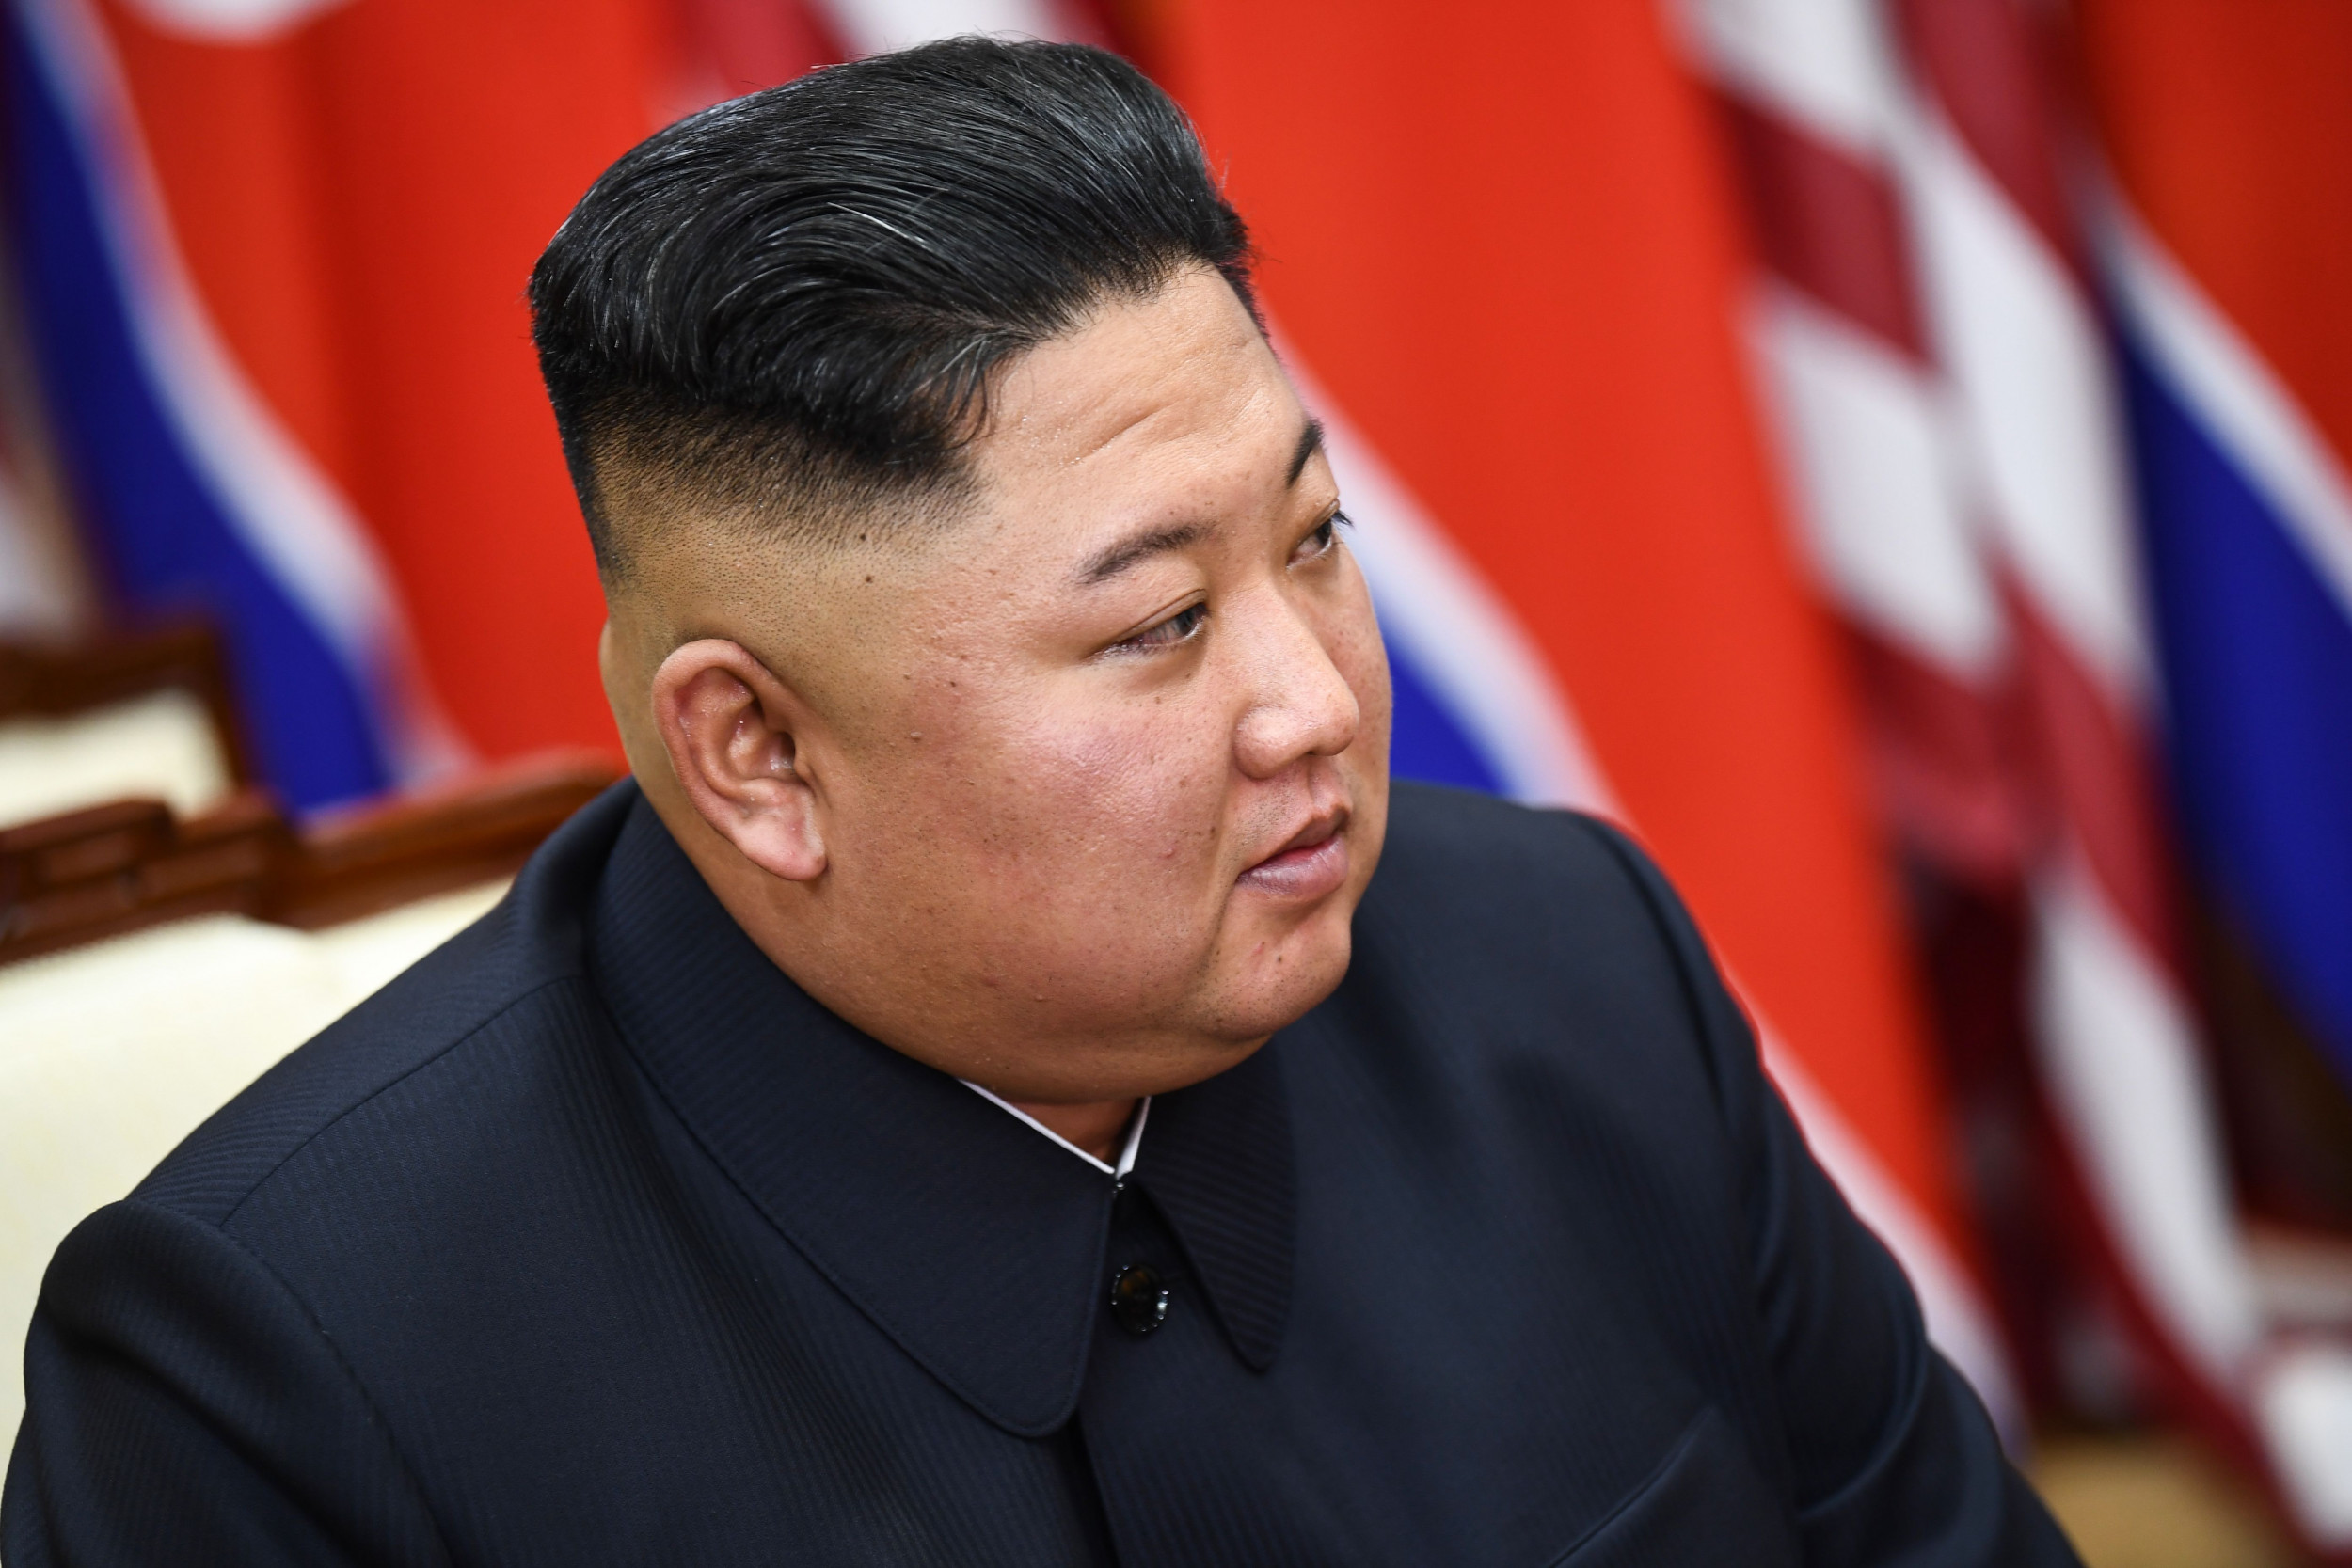 Rumoured order for students in Pyongyang to copy Kim Jong-un's hairstyle  goes viral | South China Morning Post